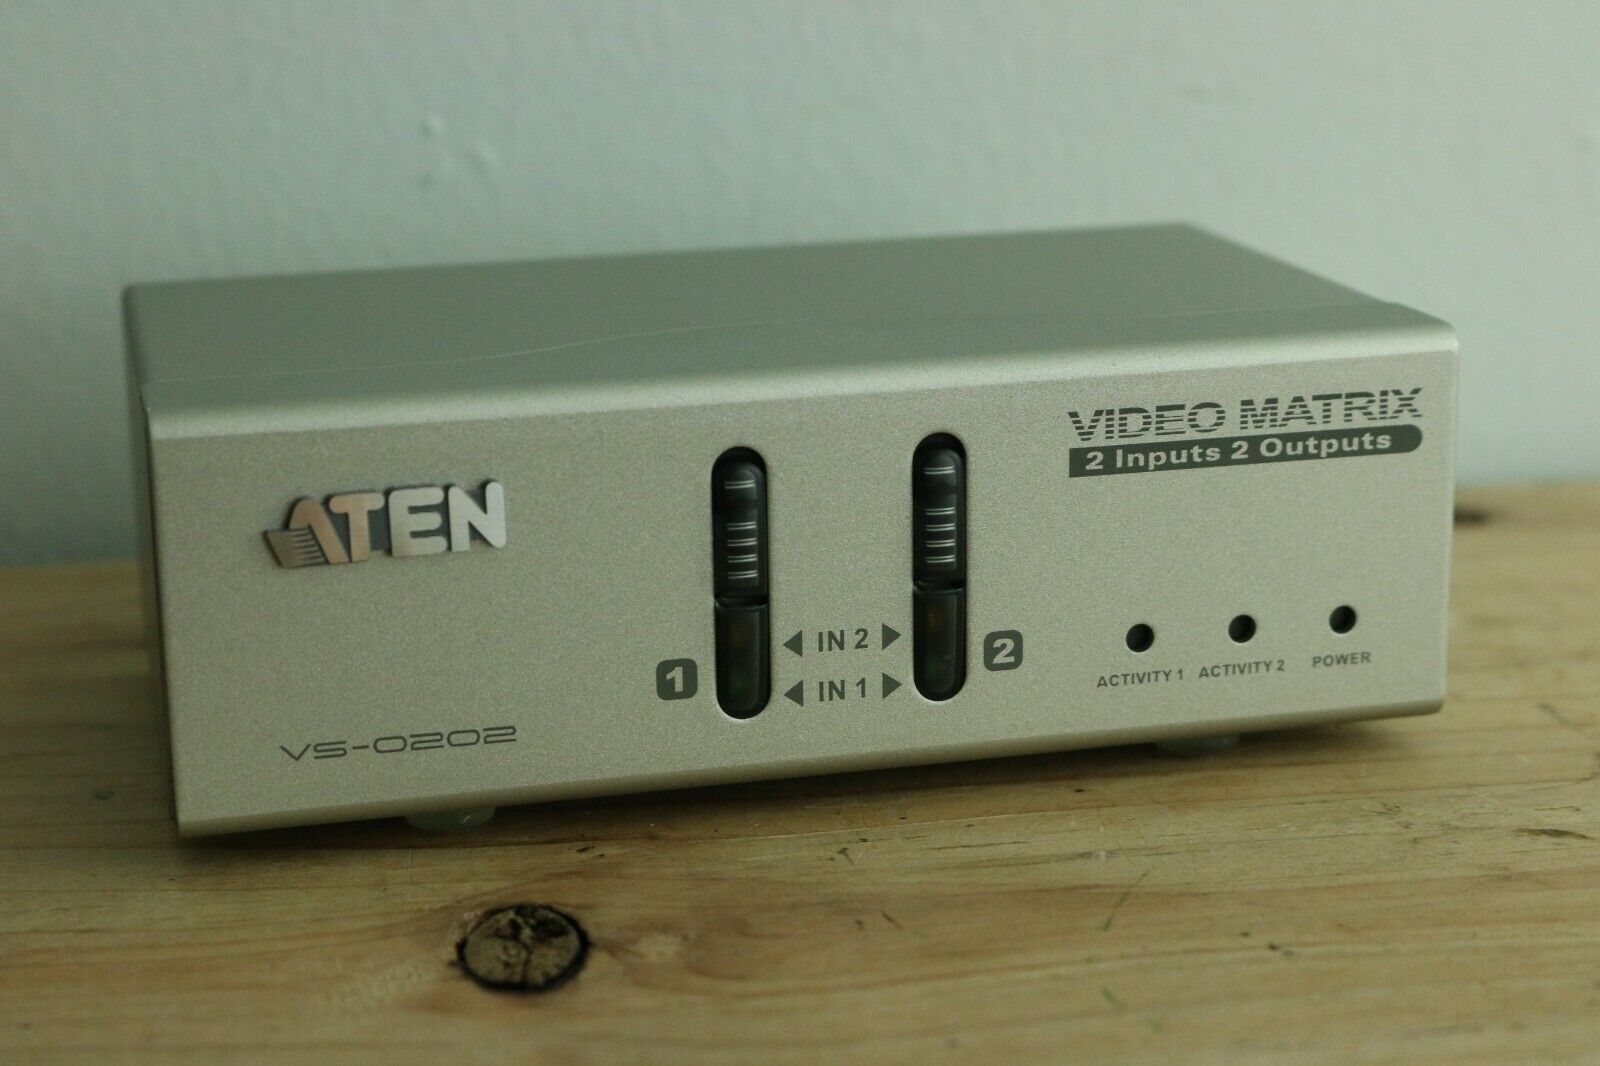 ATEN Corp Video Matrix 2 Inputs 2 Outputs VS-0202 - Monitor Switch with Audio